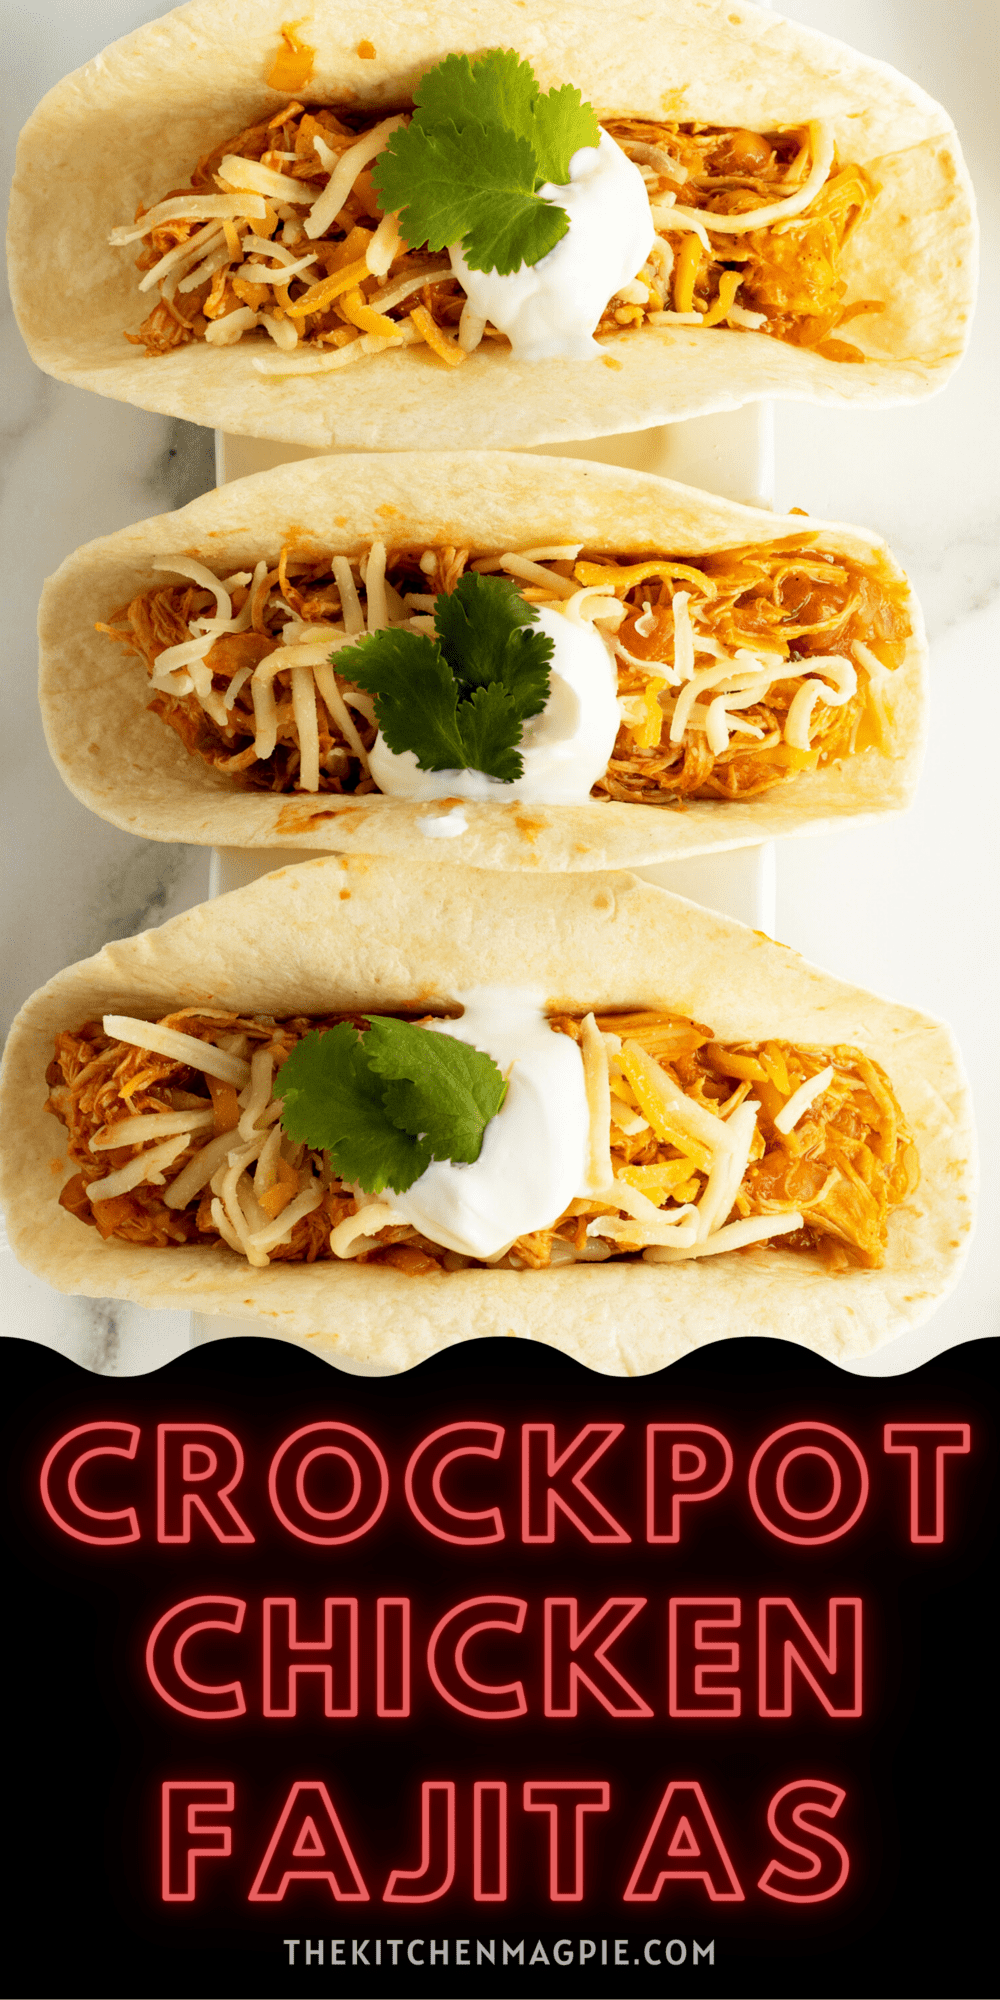 Easy shredded chicken breast fajitas done in the crockpot! Nothing like this delicious meal waiting for you at the end of the day!